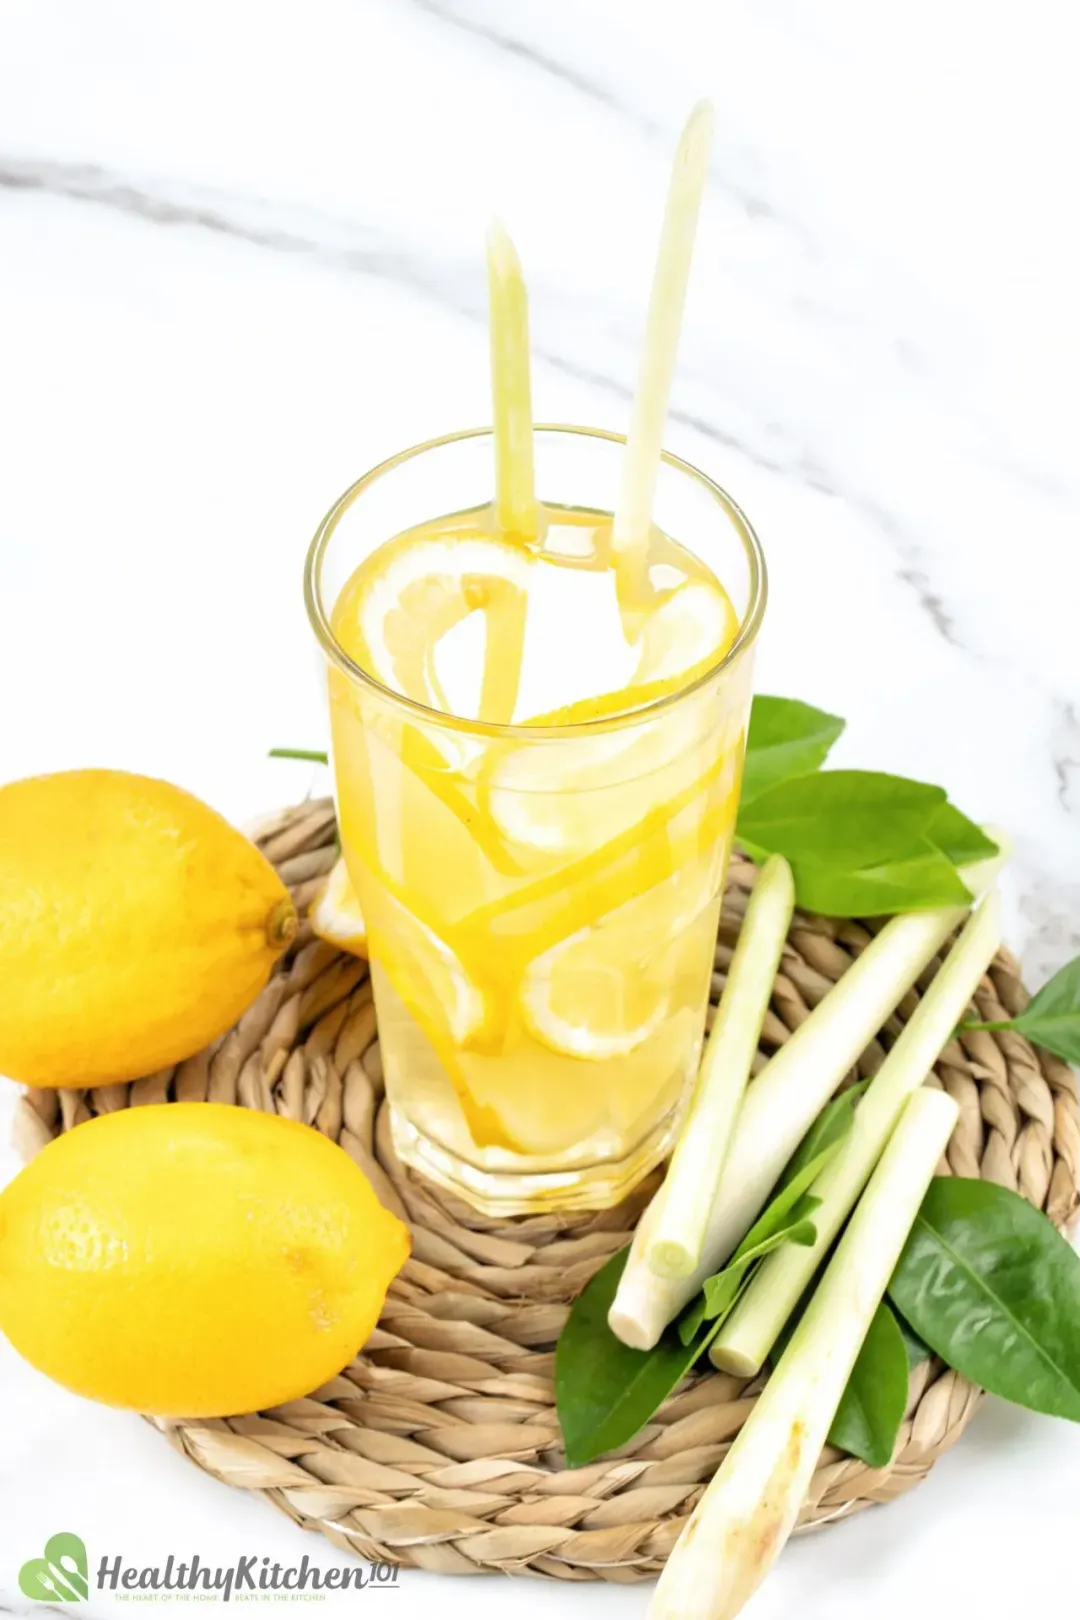 A tall glass of apple cider vinegar and lemon juice drink, packed with lemon wheels, next to lemongrass, whole lemons, and leaves